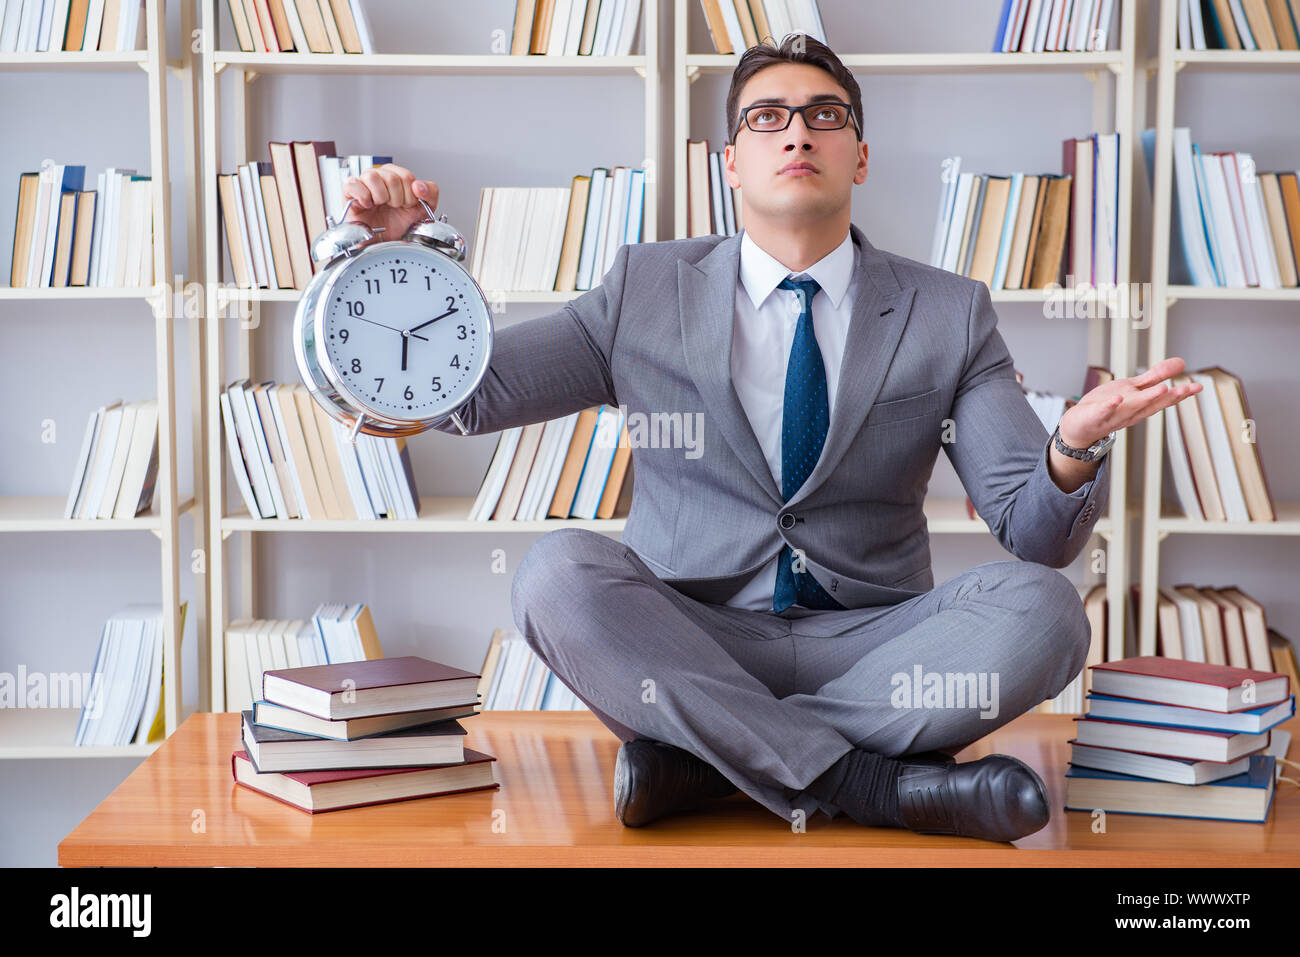 Businessman student in lotus position with an alarm clock in lib Stock Photo